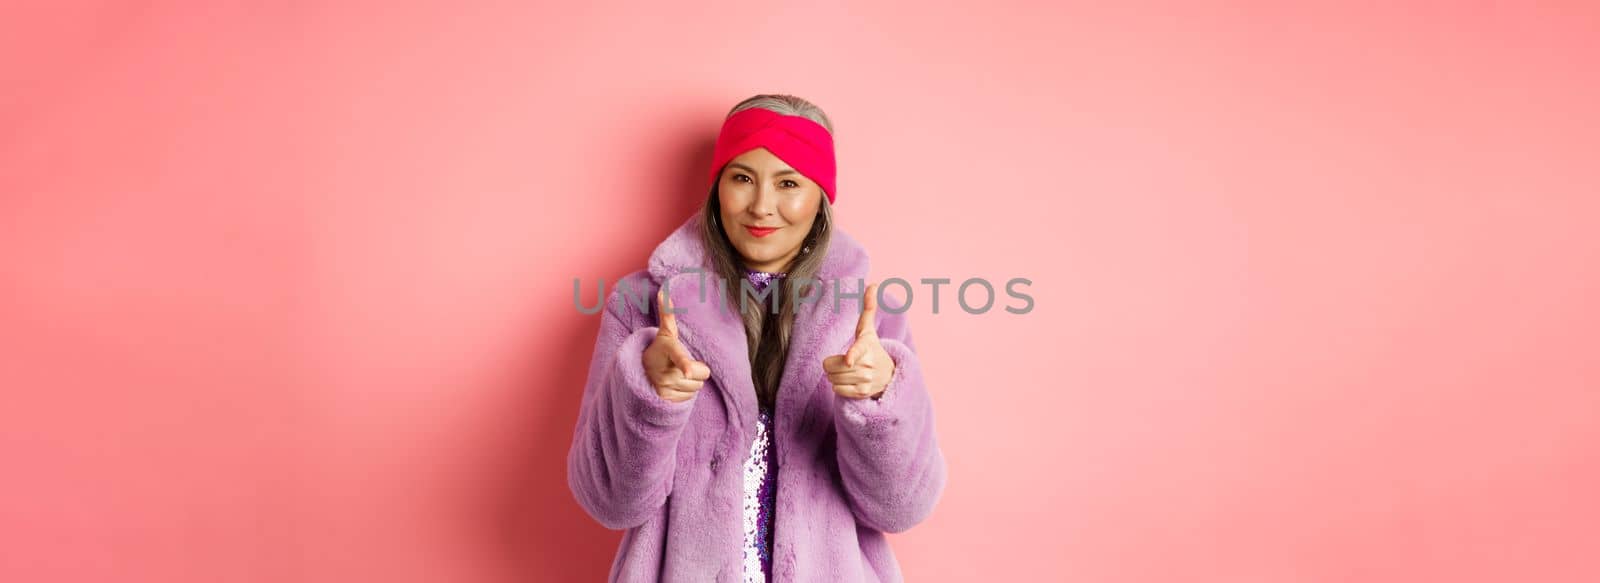 Fashion and shopping concept. Cool asian senior woman in stylish fake fur coat pointing fingers at camera, asking you to check out promo offer, standing over pink background.